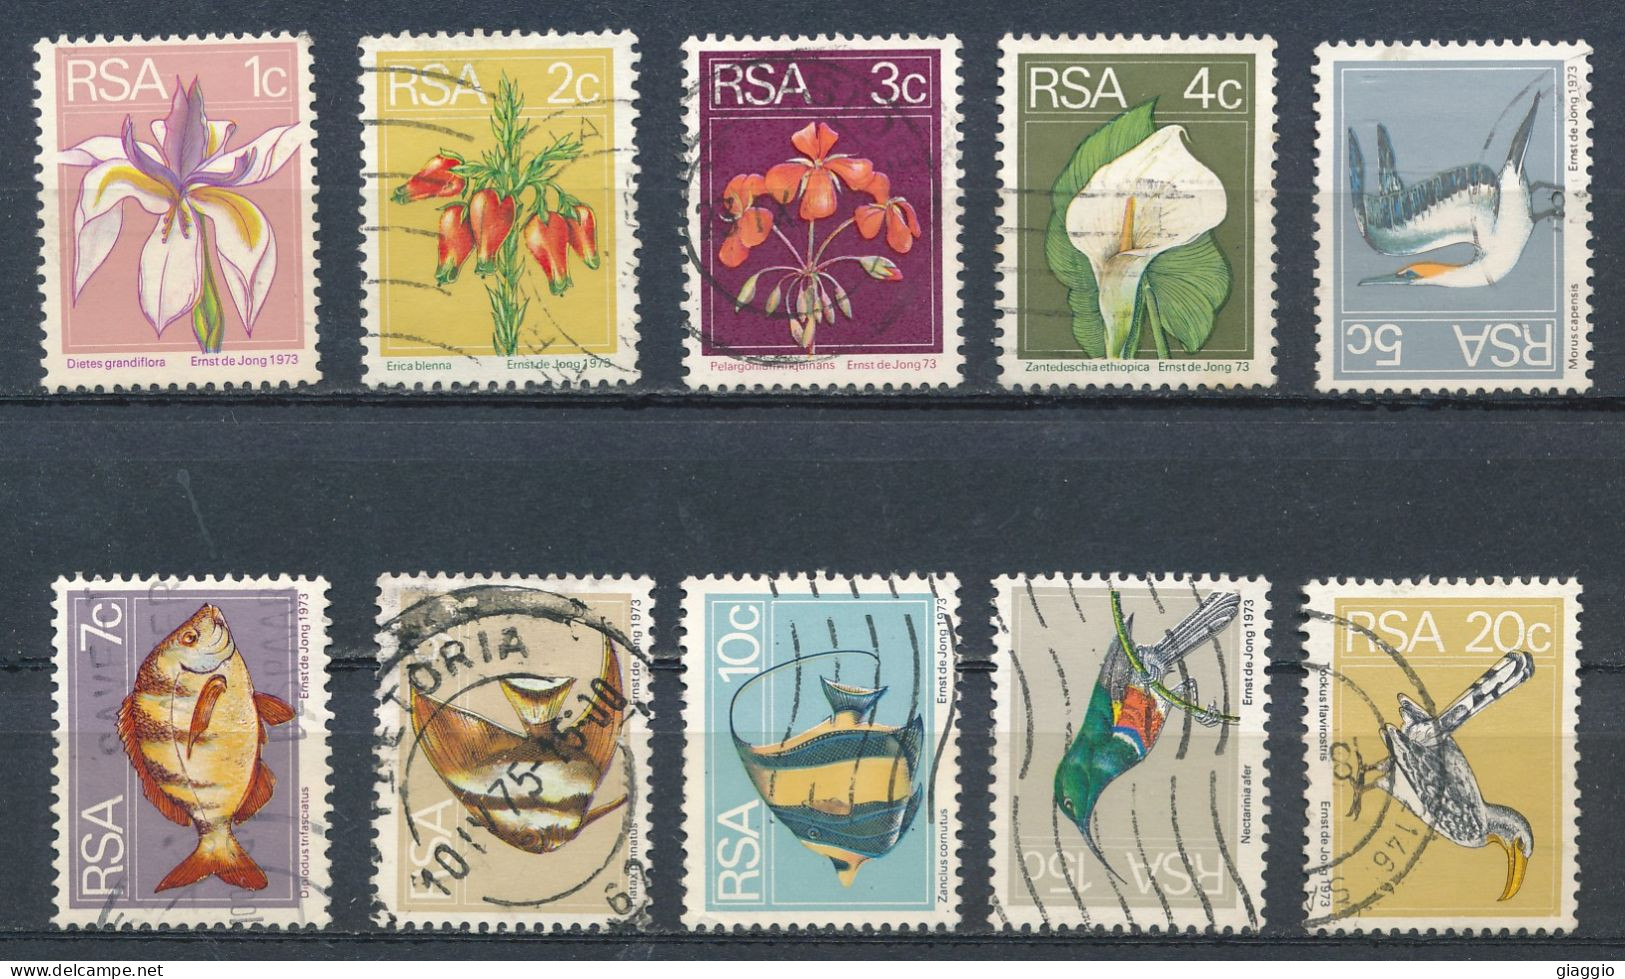 °°° SOUTH AFRICA  - Y&T N°359/70 - 1974 °°° - Used Stamps